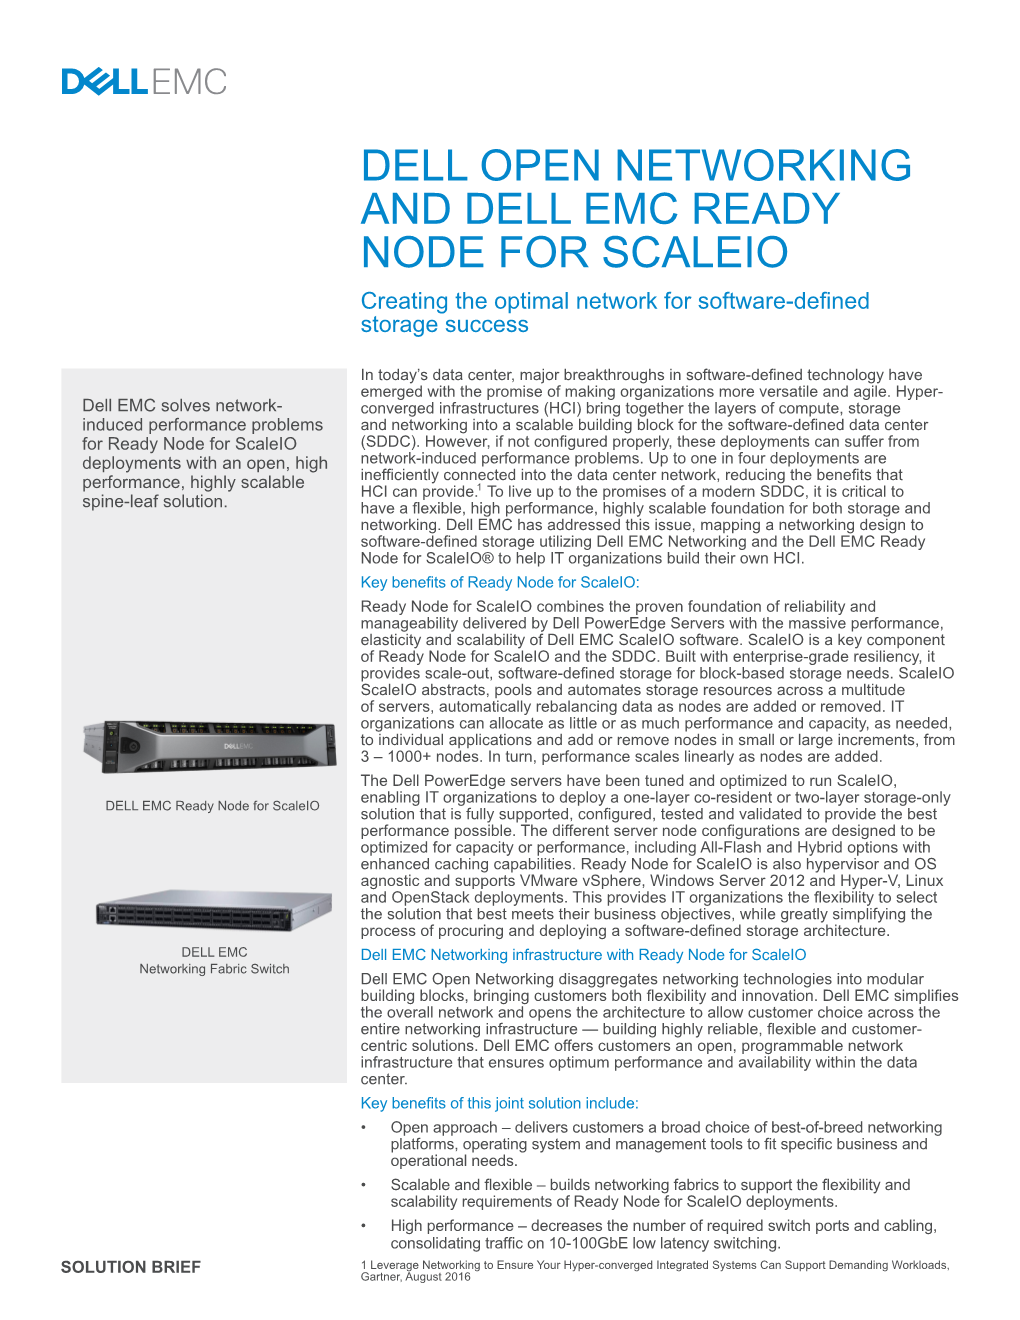 DELL OPEN NETWORKING and DELL EMC READY NODE for SCALEIO Creating the Optimal Network for Software-Defined Storage Success